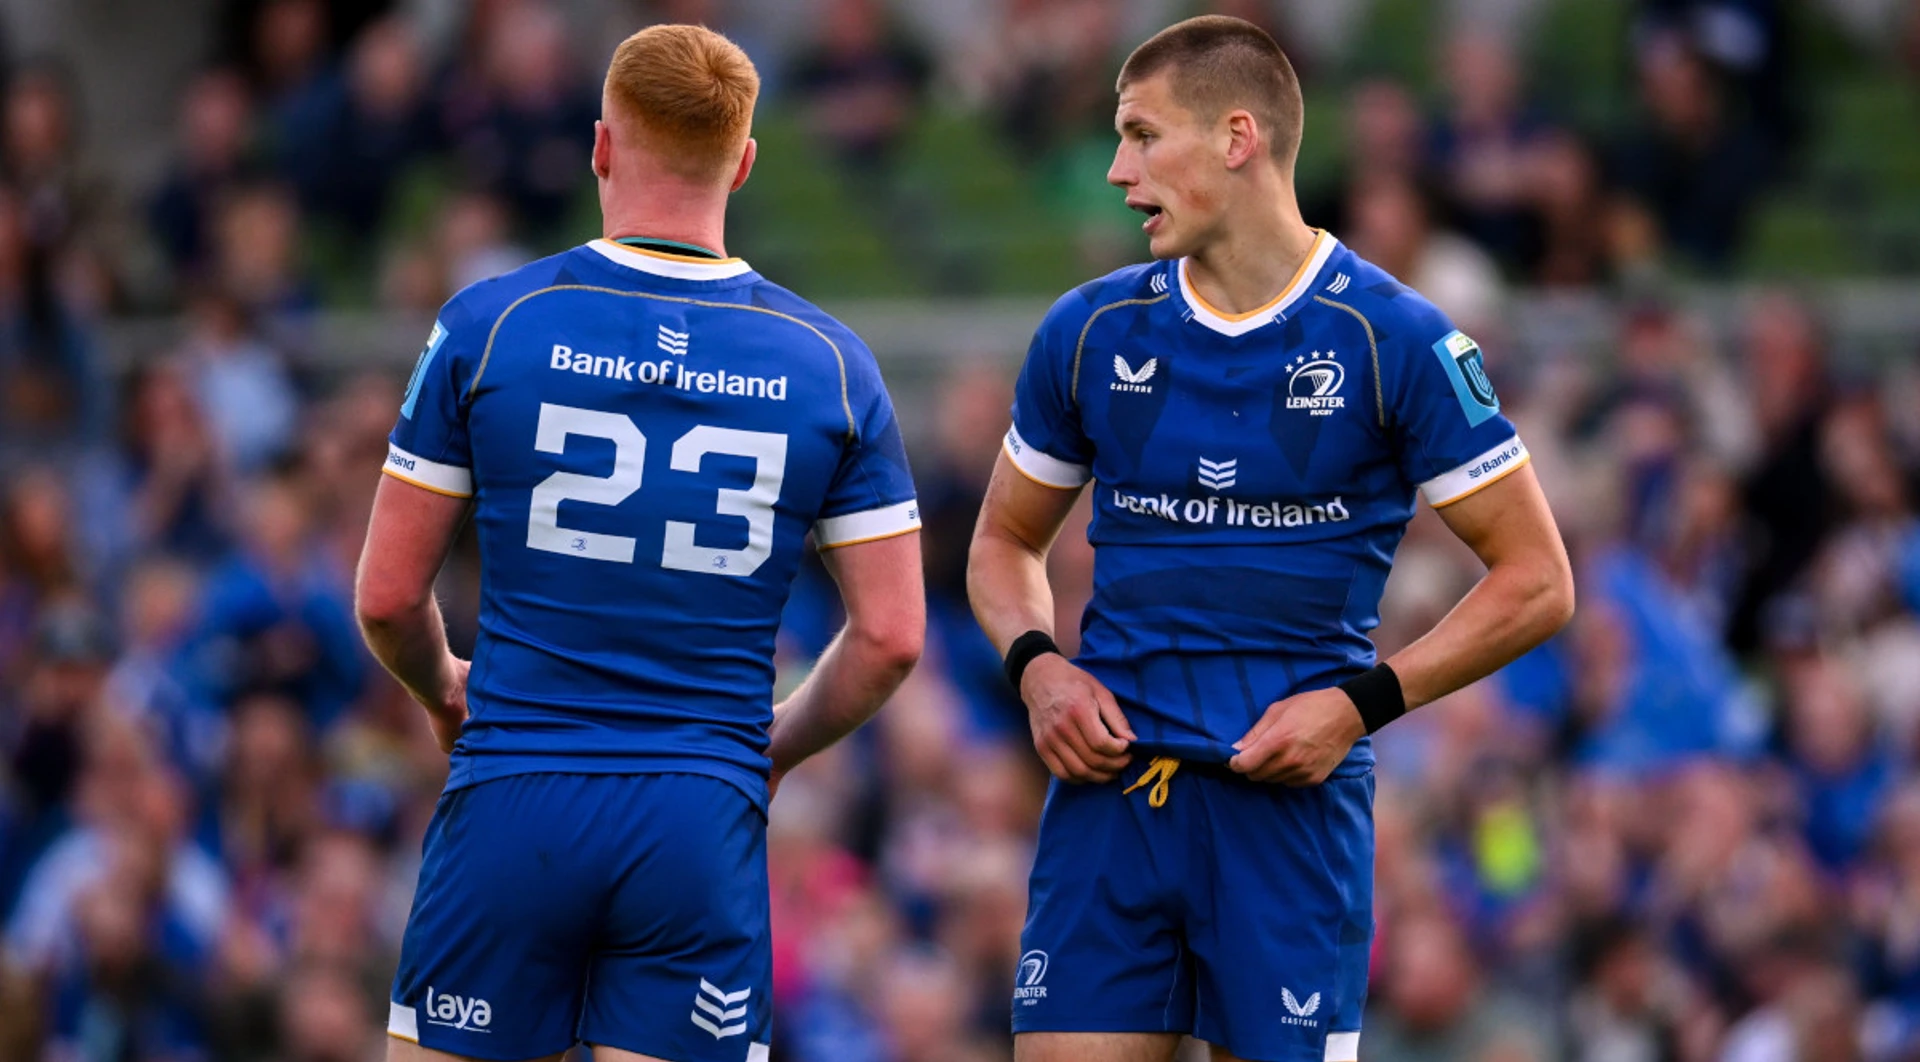 Pressure will be on Leinster after Champions Cup losses